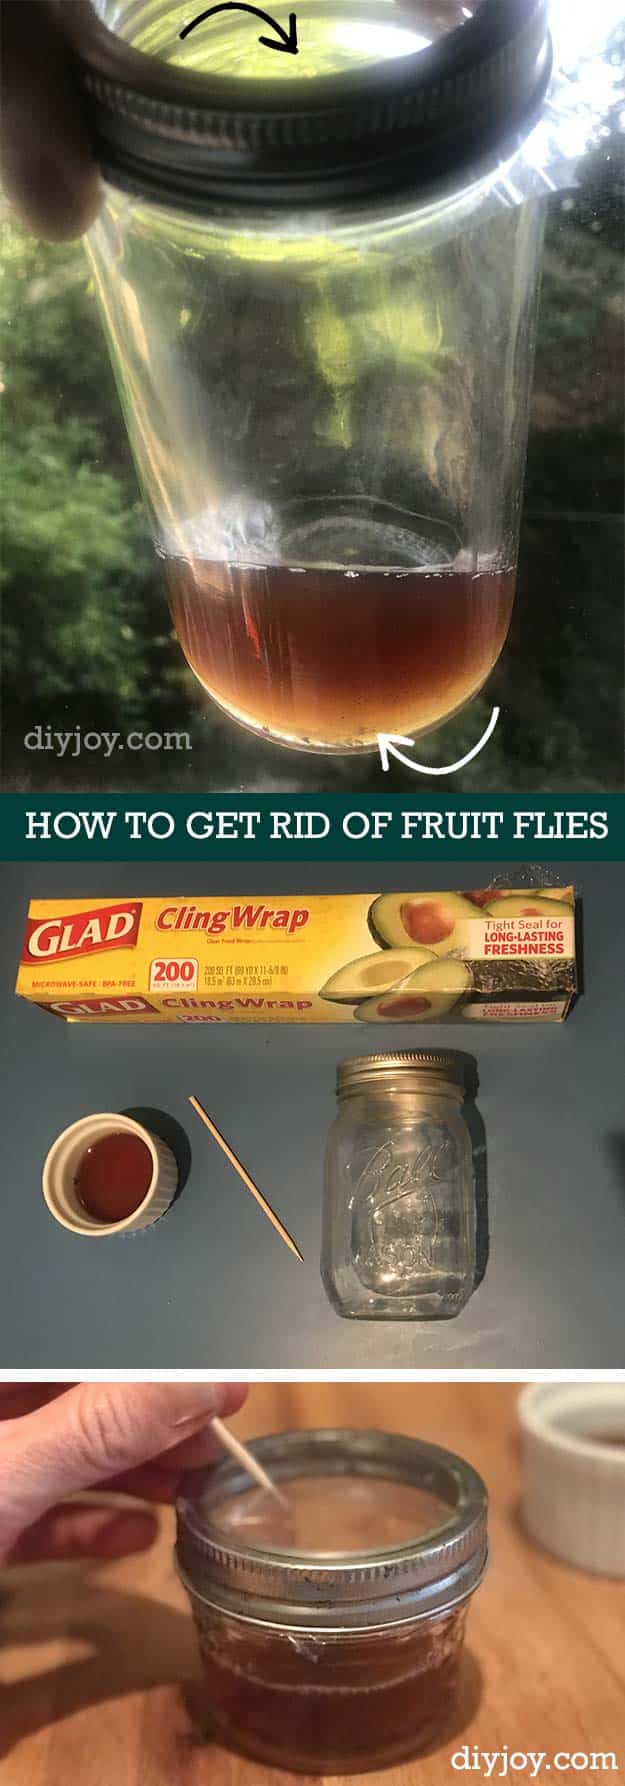 How to Get Rid of Fruit Flies In Kitchen - Homemade Fruit Fly Trap tp Make With Mason Jar and Vinegar - Natural Ways to Get Rid of Bugs in Kitchen and Around Sink - DIY Fruit Fly Trap - Cool Mason Jar Hacks Pin on Pinterest